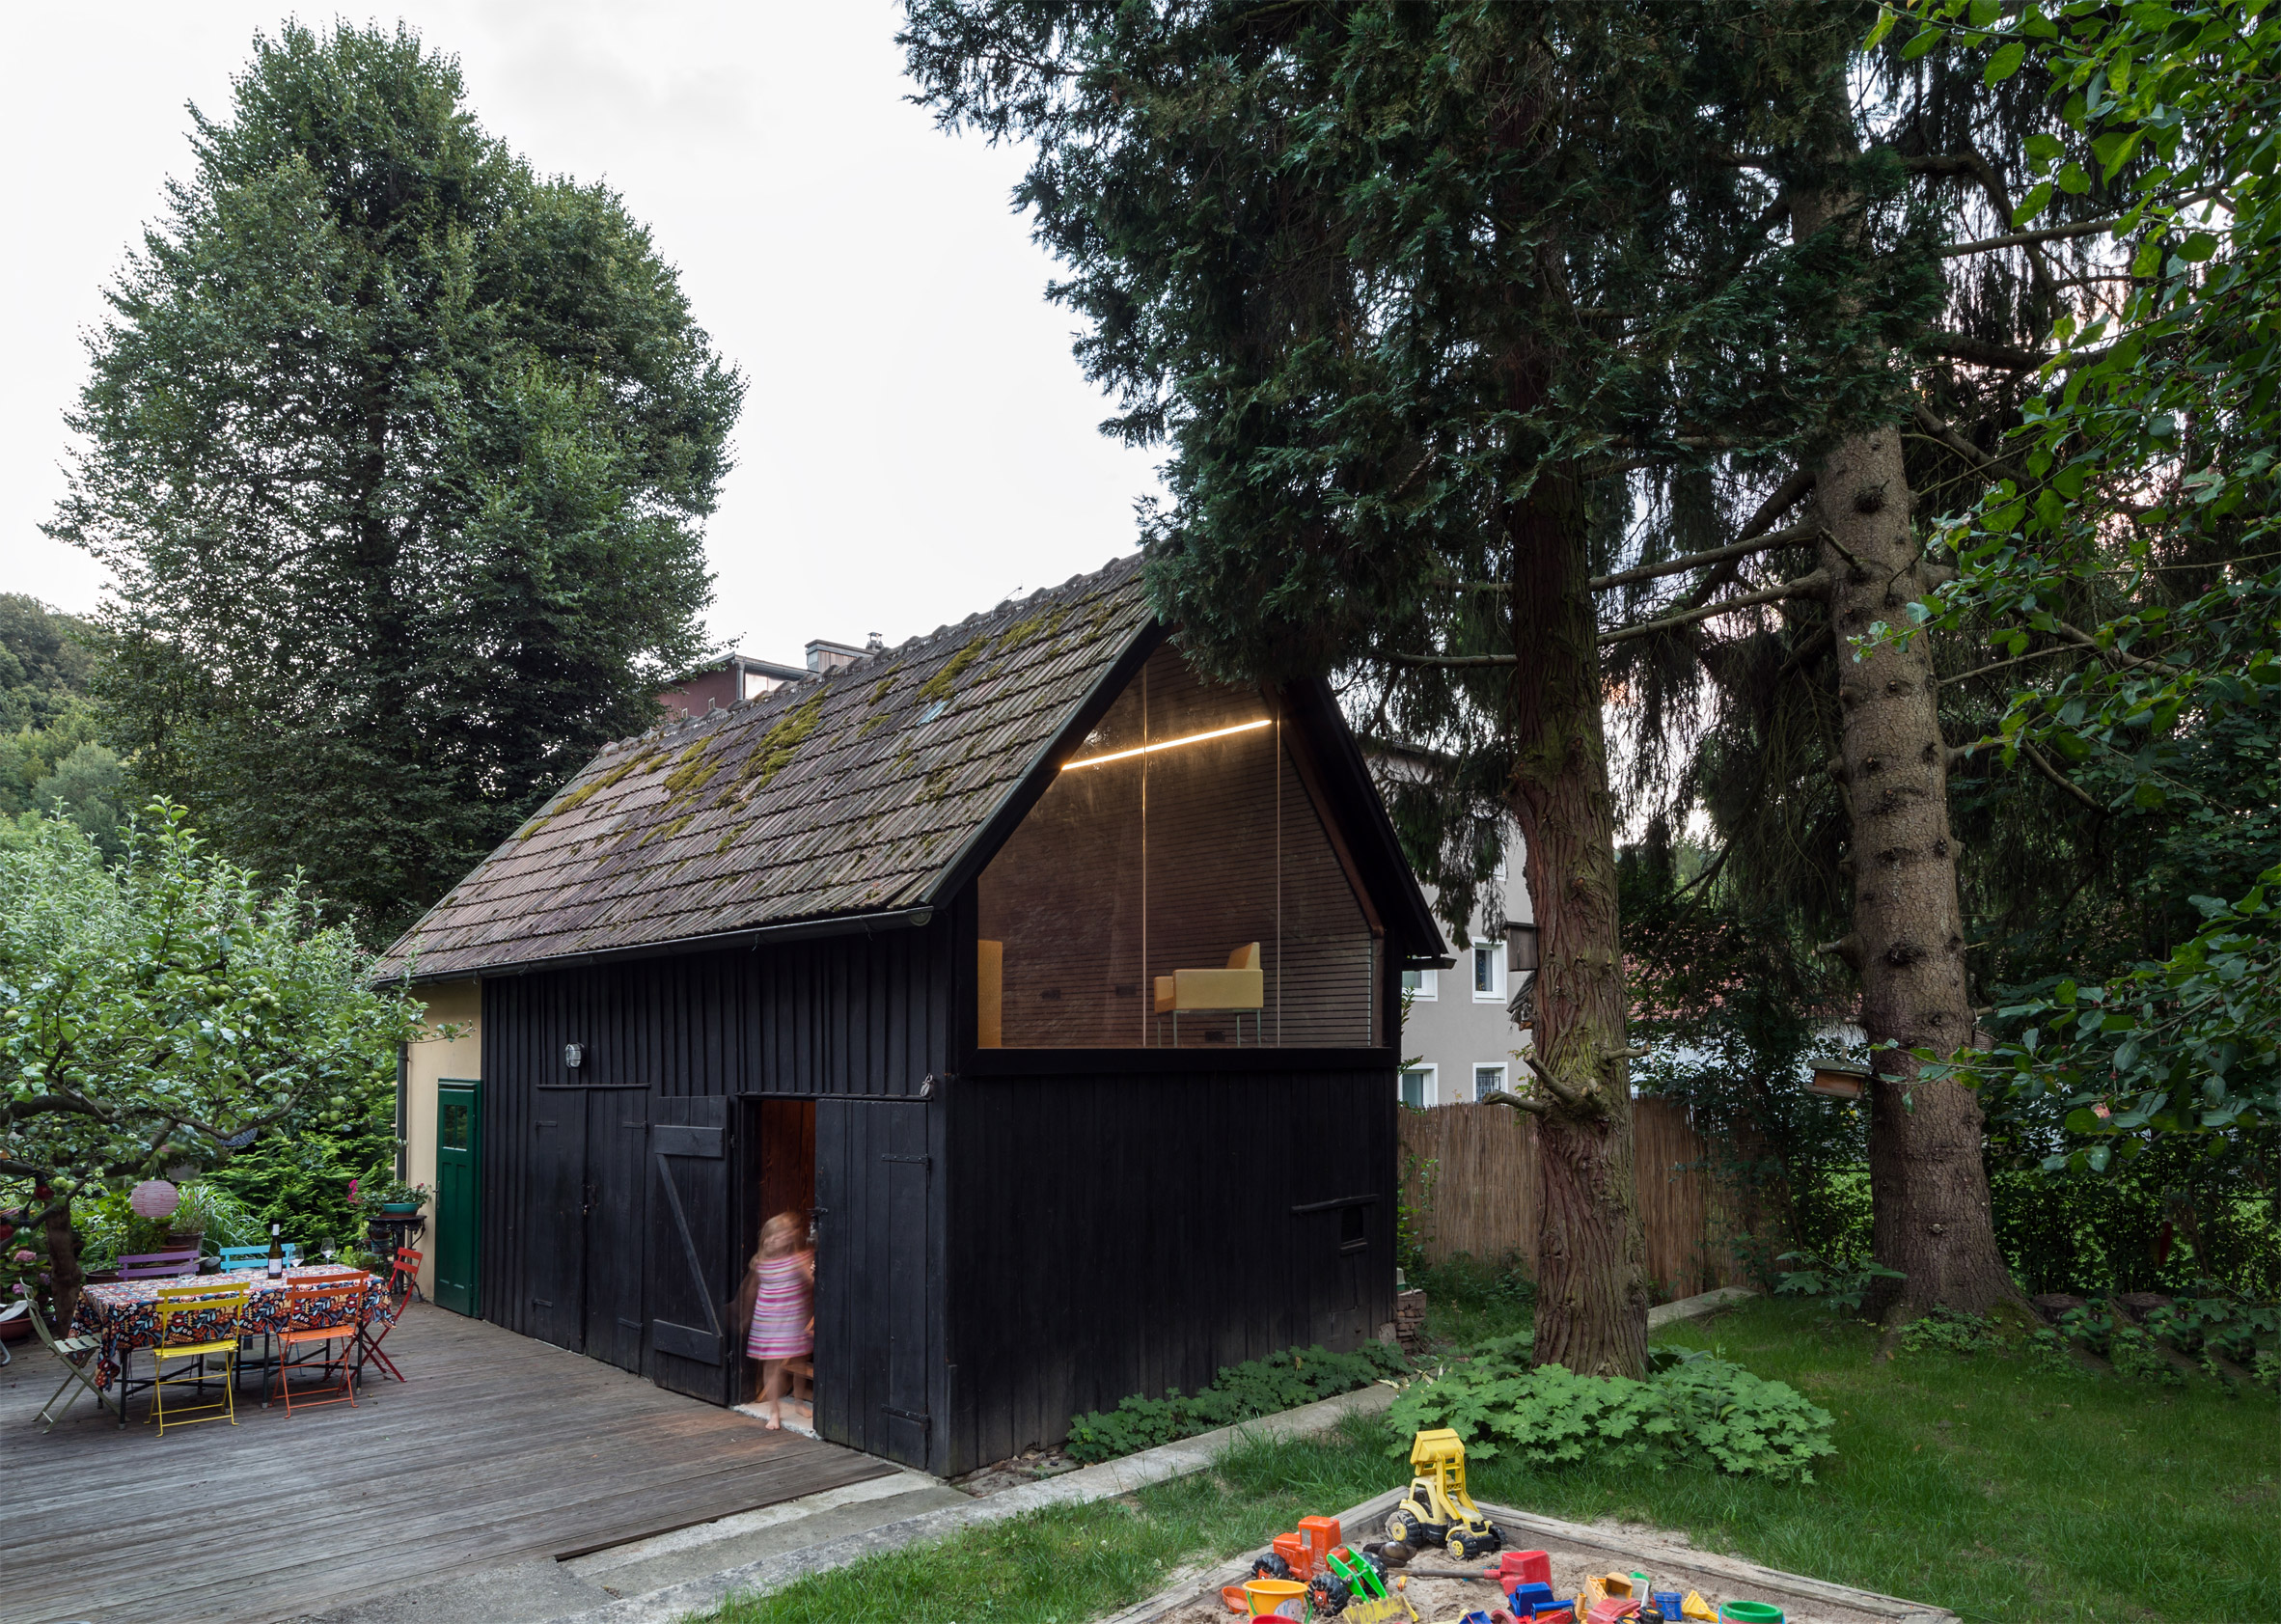 The Enchanted Shed by Sue Architekten